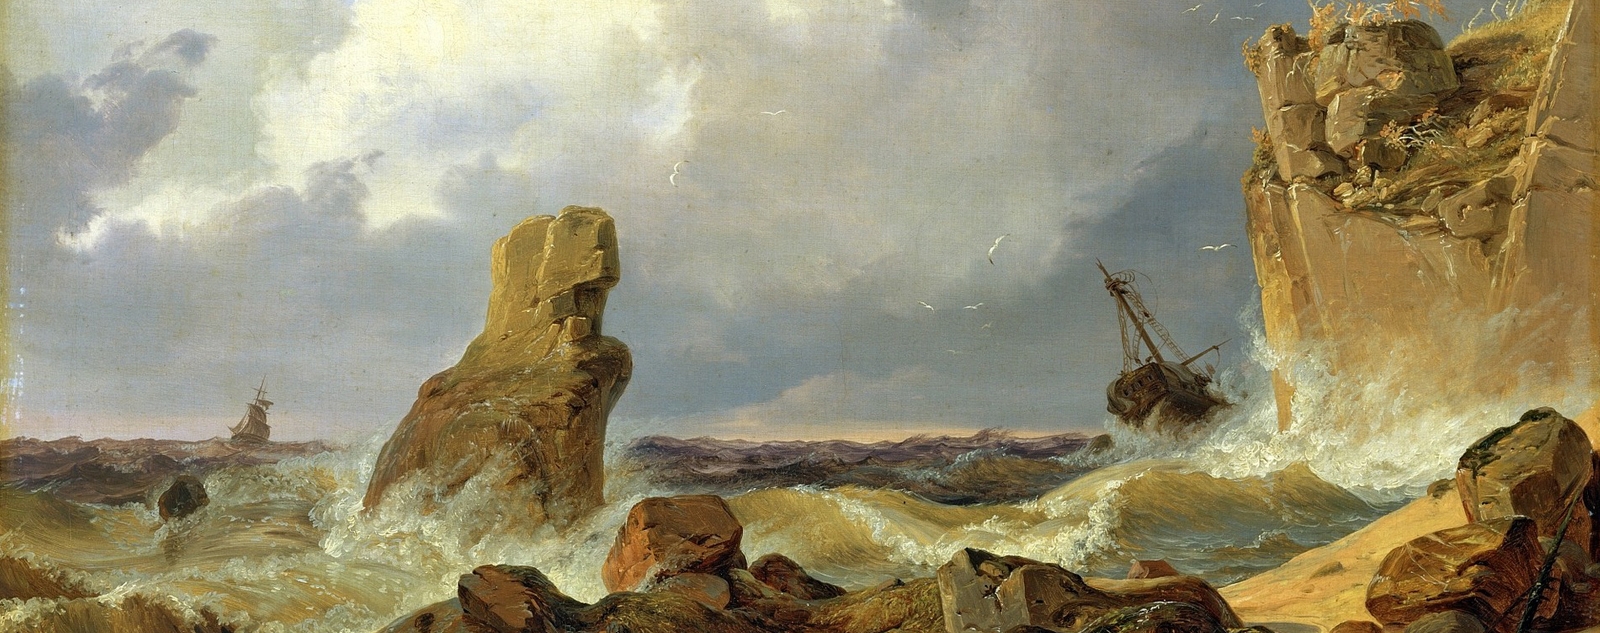 painting of a shipwreck on a rocky coast